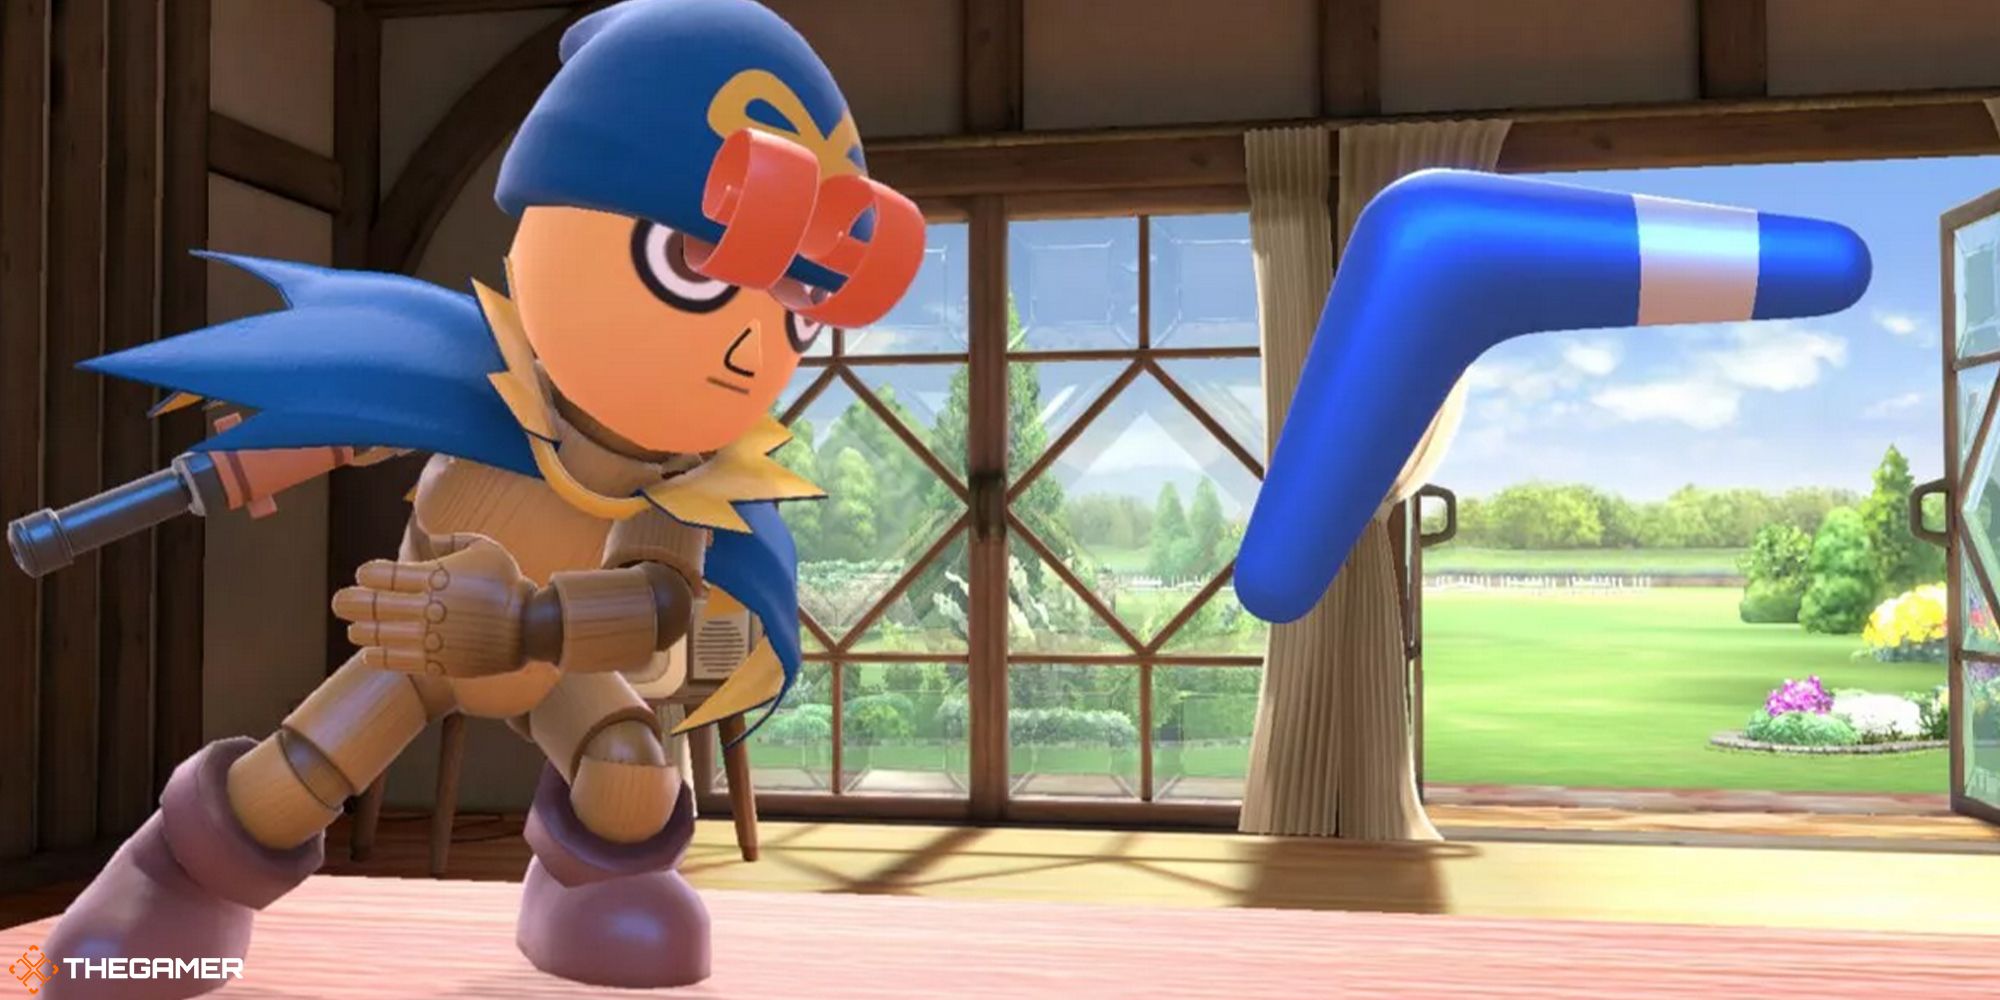 Geno in the middle of a boomerang throwing animation in Super Smash Bros Ultimate